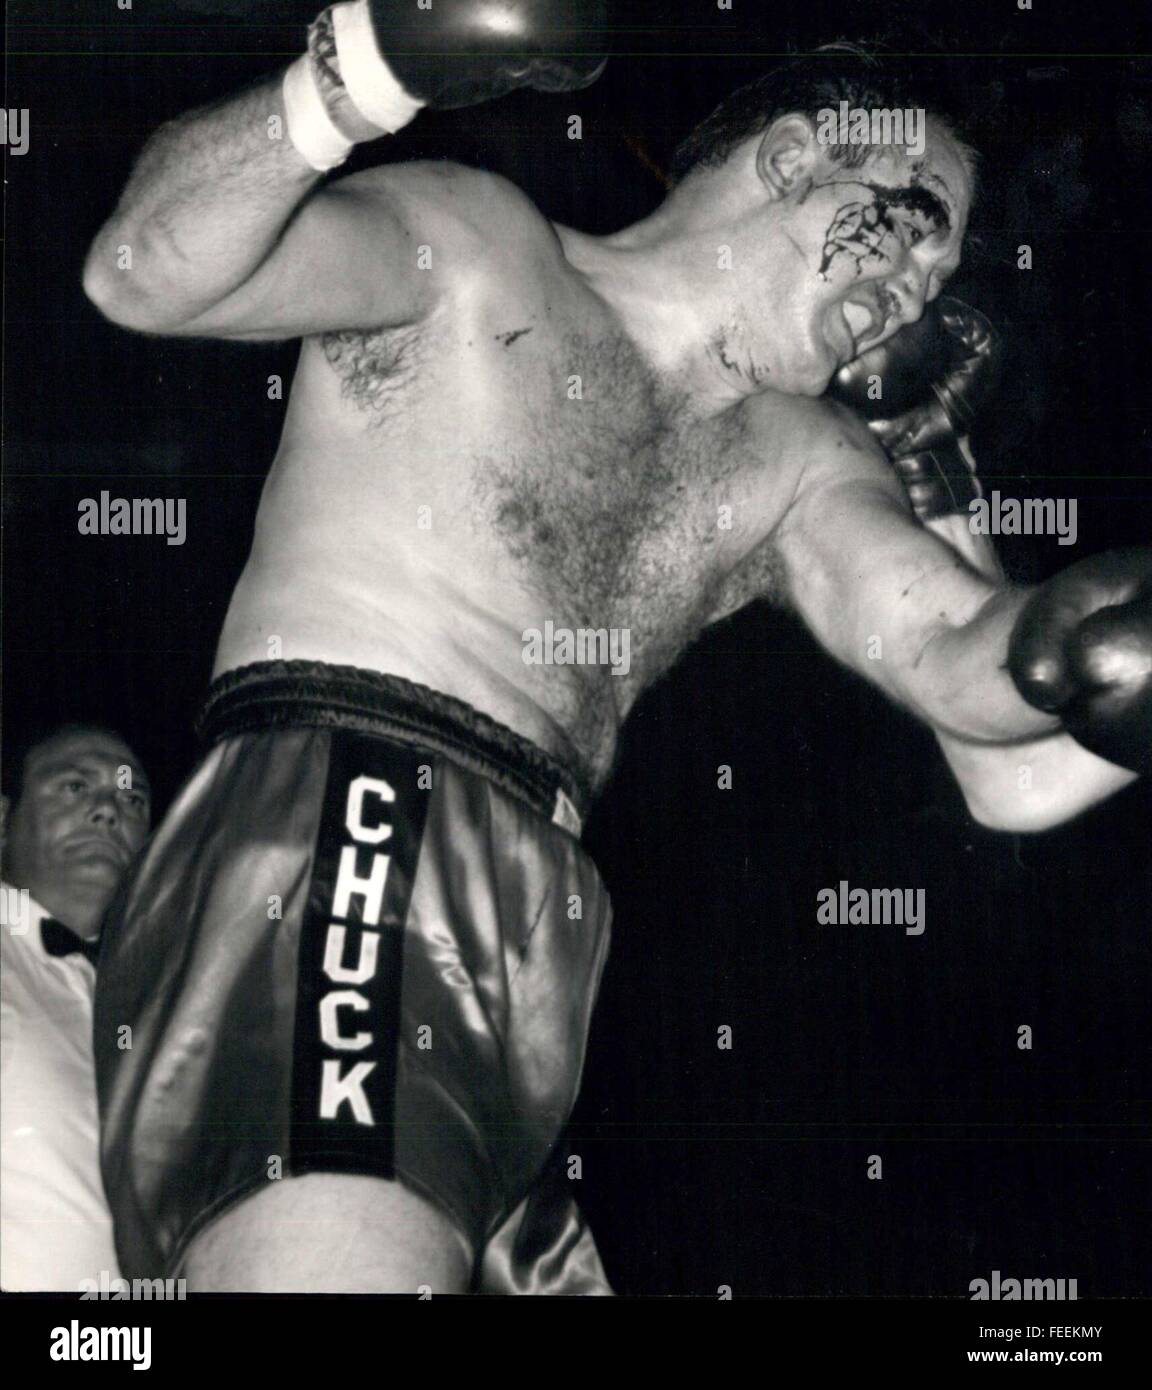 1969 - Heavyweight Contest: Wembley, England : Hungary-born Joe Bugner, Latest British Heavyweight Hope, this evening Met Chuck Wepner, of New Jersey, U.S.A., in a 10-round Heavyweight contest at the empire pool, Wembley. here Bugner Lands right to the bloodied face of wepner, Burger won Fight when referee stopped fight in third Round after Wepner's Right eye was Badly cut. © Keystone Pictures USA/ZUMAPRESS.com/Alamy Live News Stock Photo